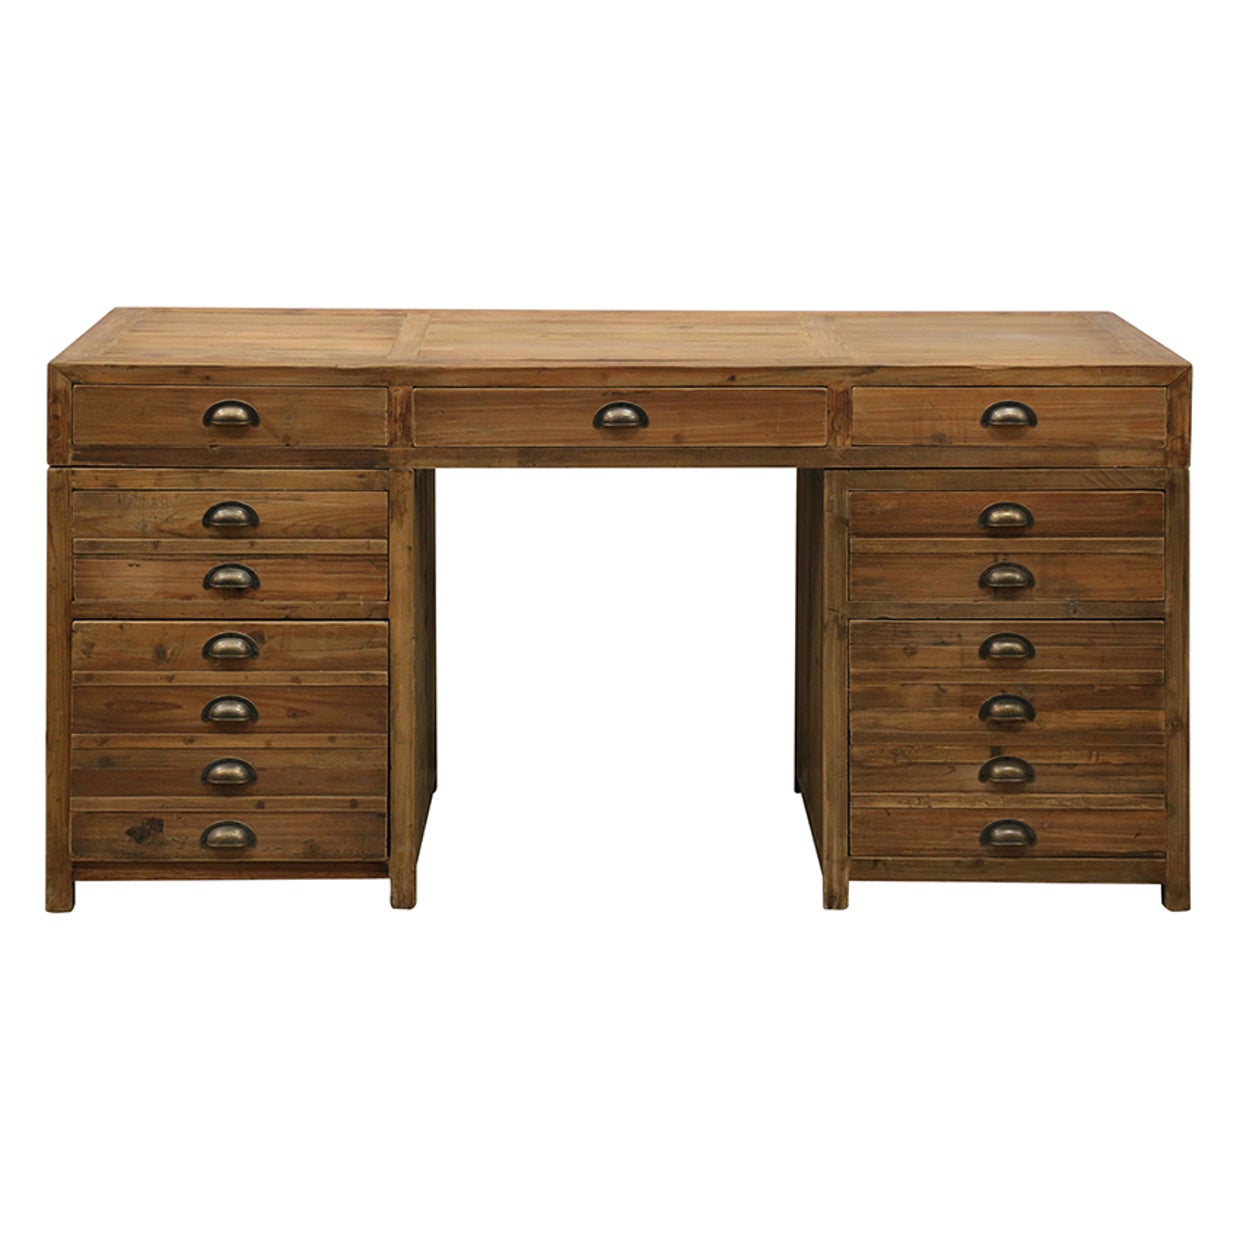 Algiers Desk With Drawersin Old Recycled Pine